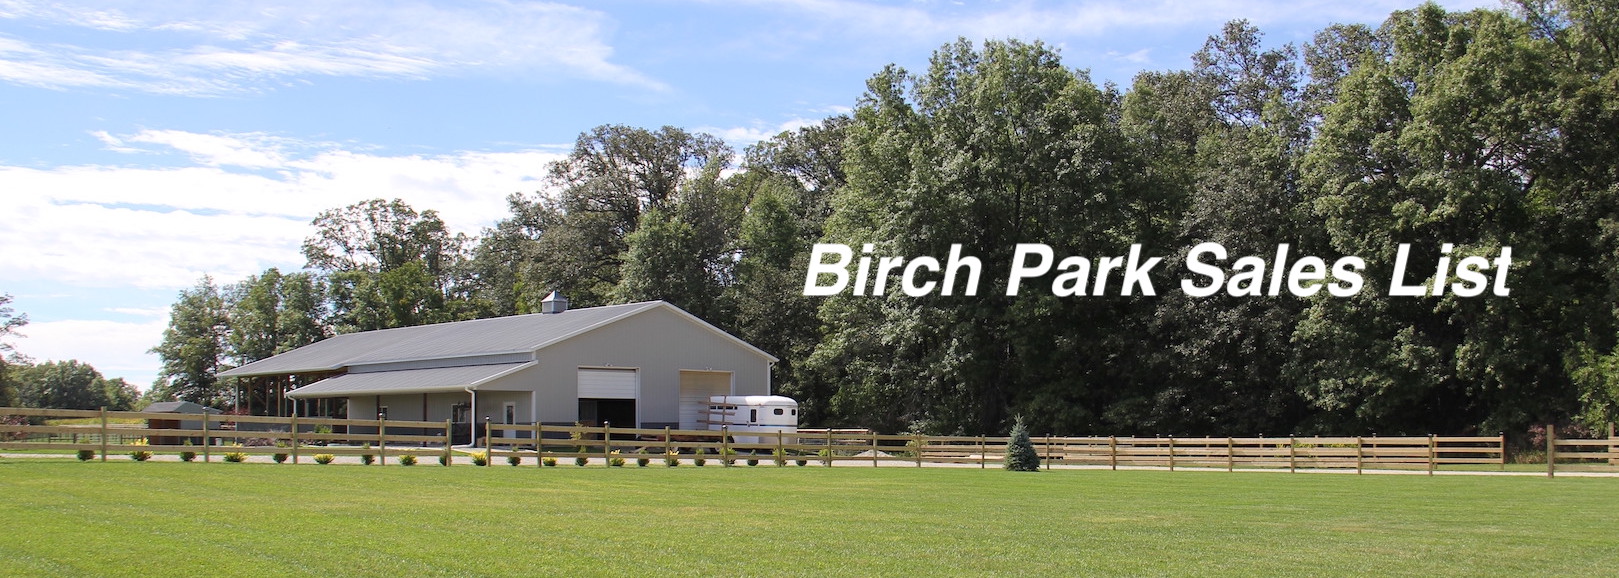 Available Sales Horses from Birch Park